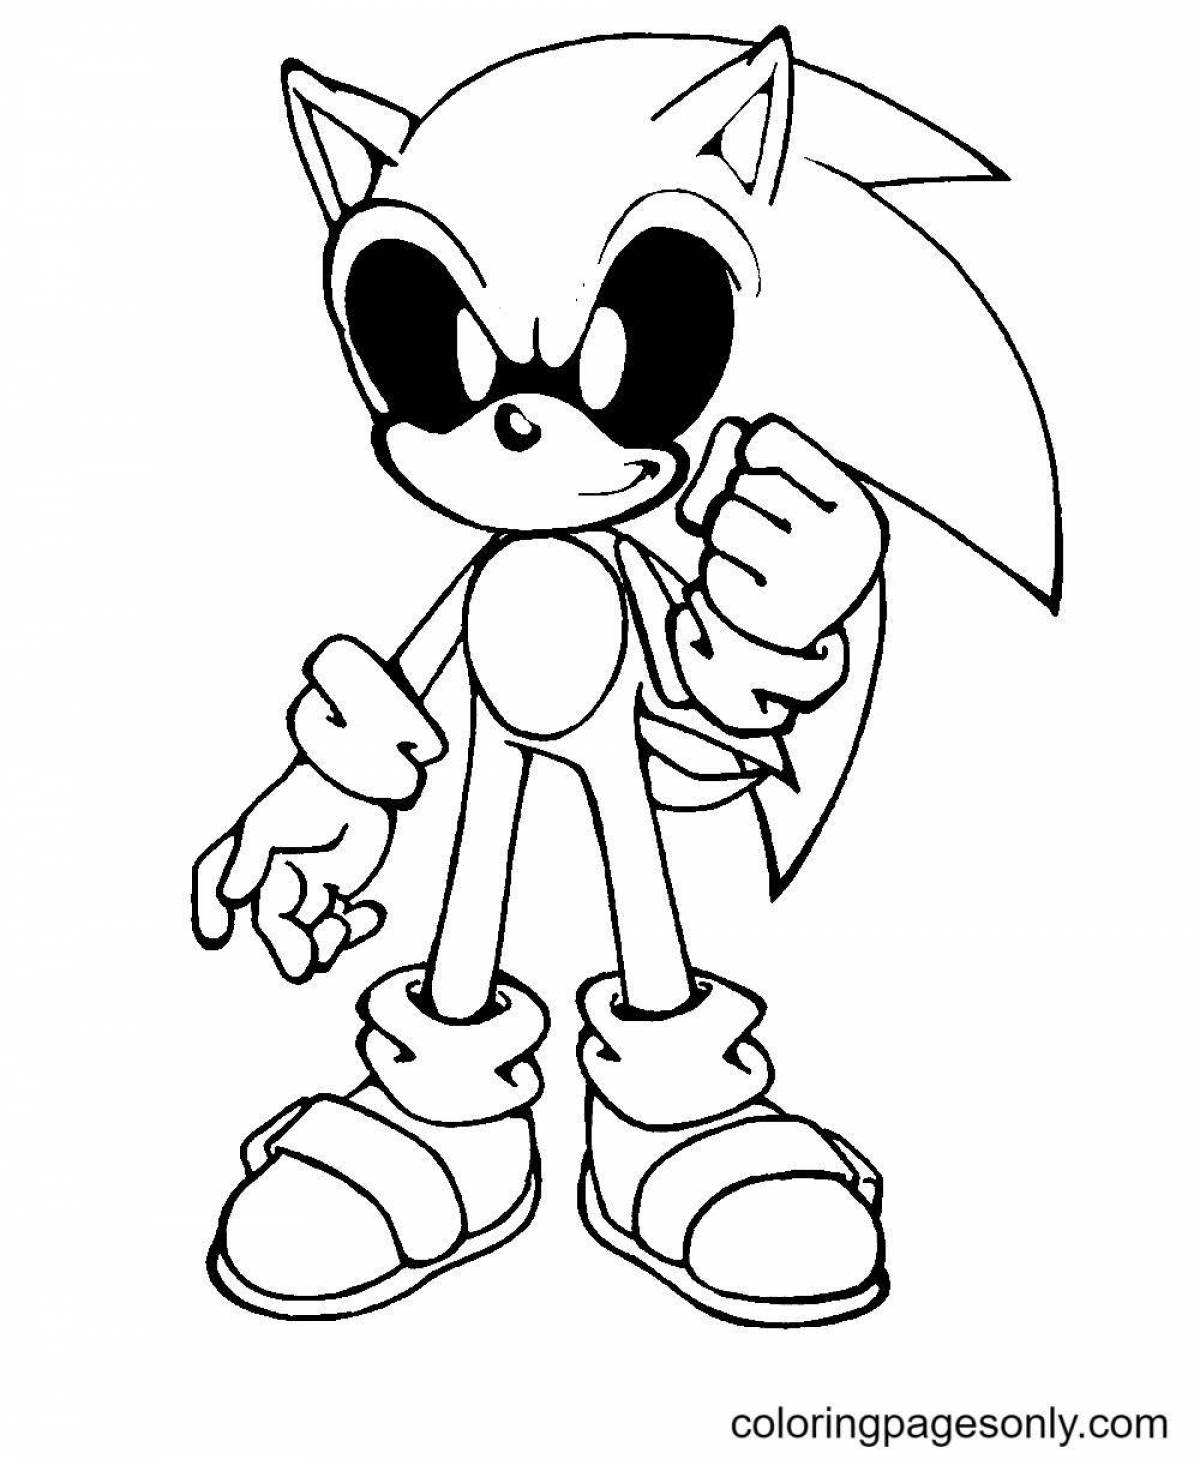 Super sonic exe intensive coloring